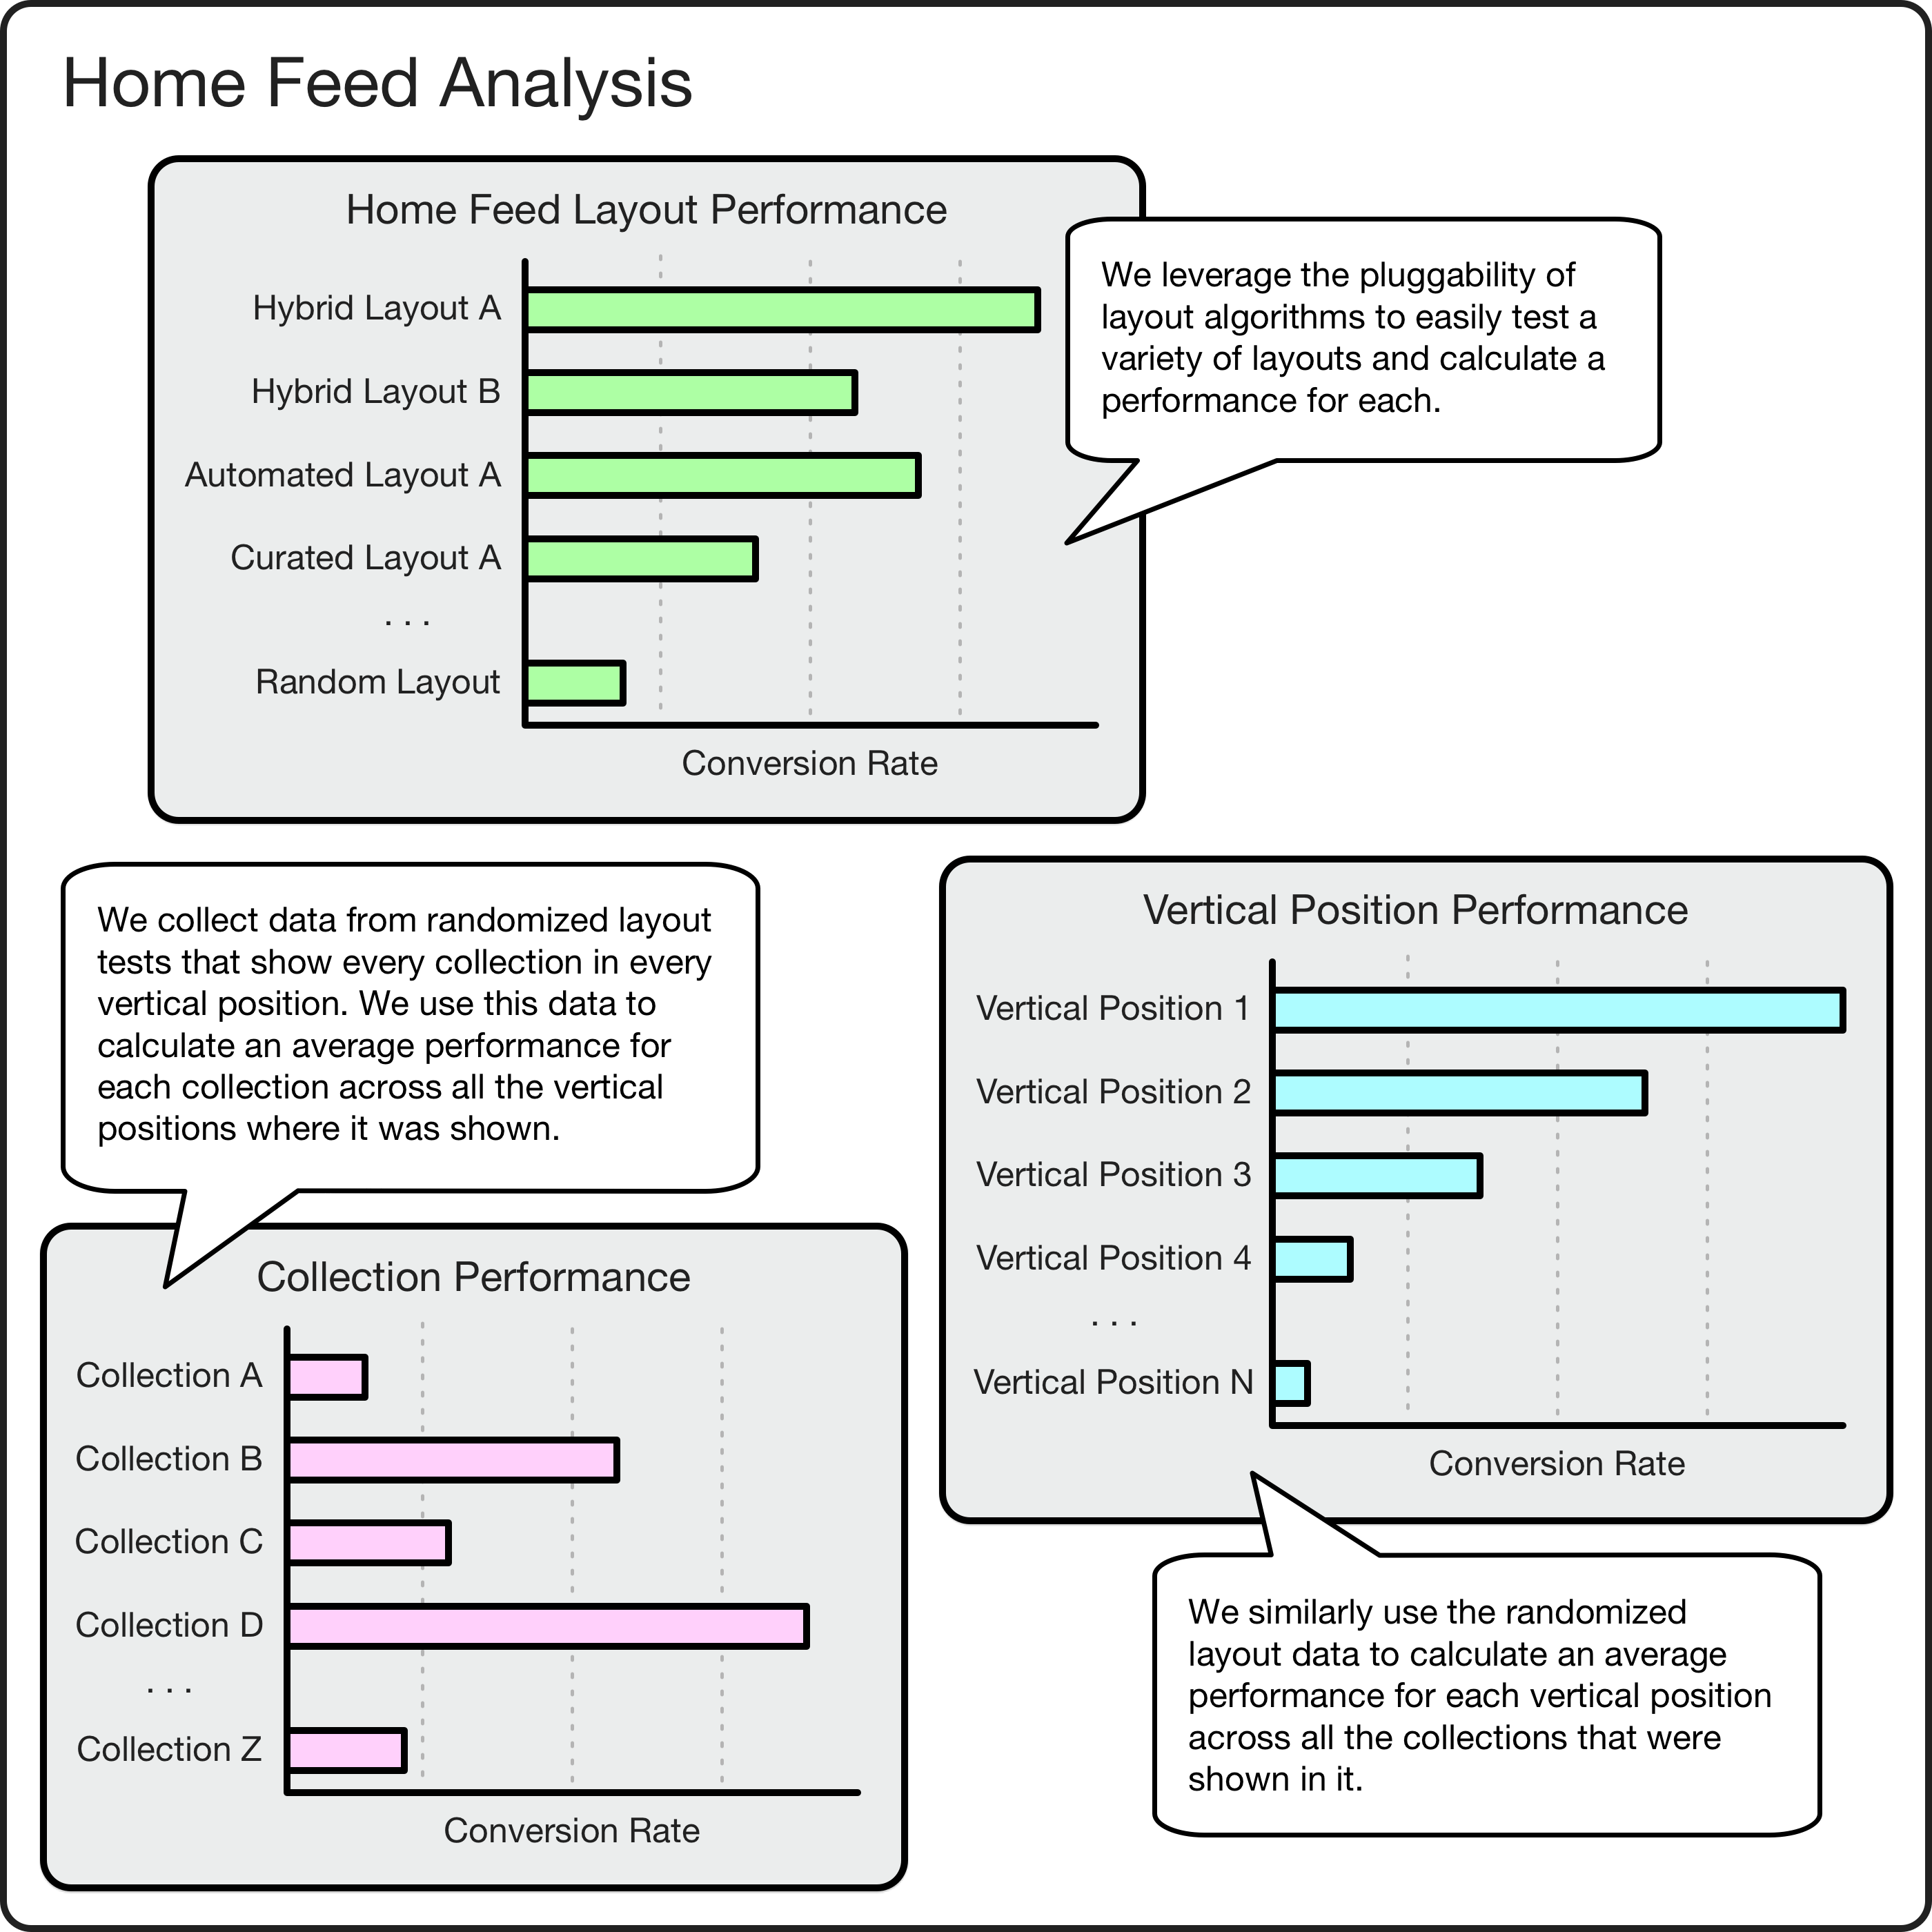 Home feed analysis enabled by pluggable layout algorithms.